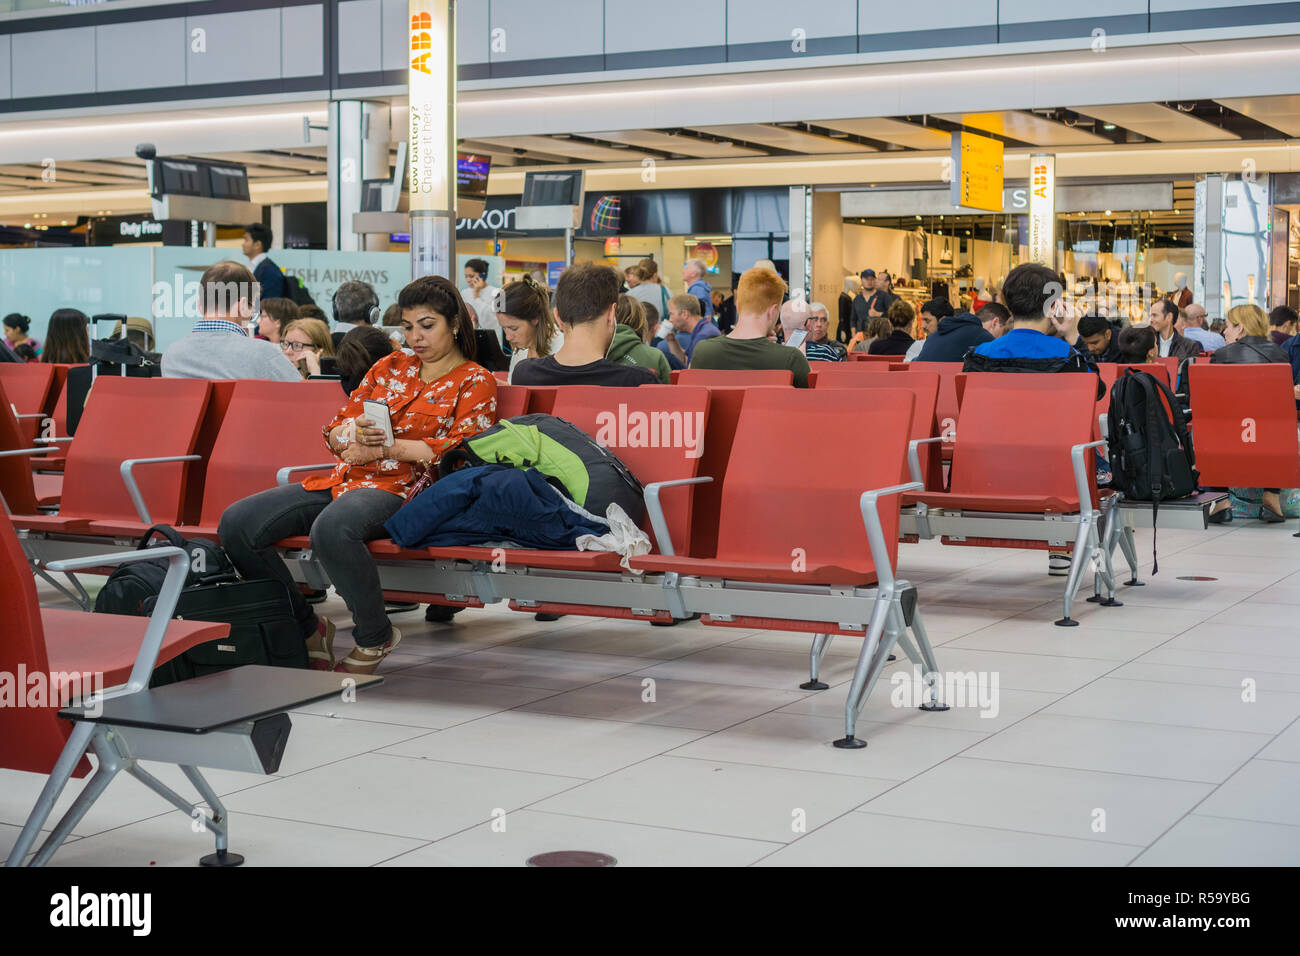 September 10, 2017 London/UK - People sitting on the chairs in one of the waiting areas at Heathrow airport Stock Photo